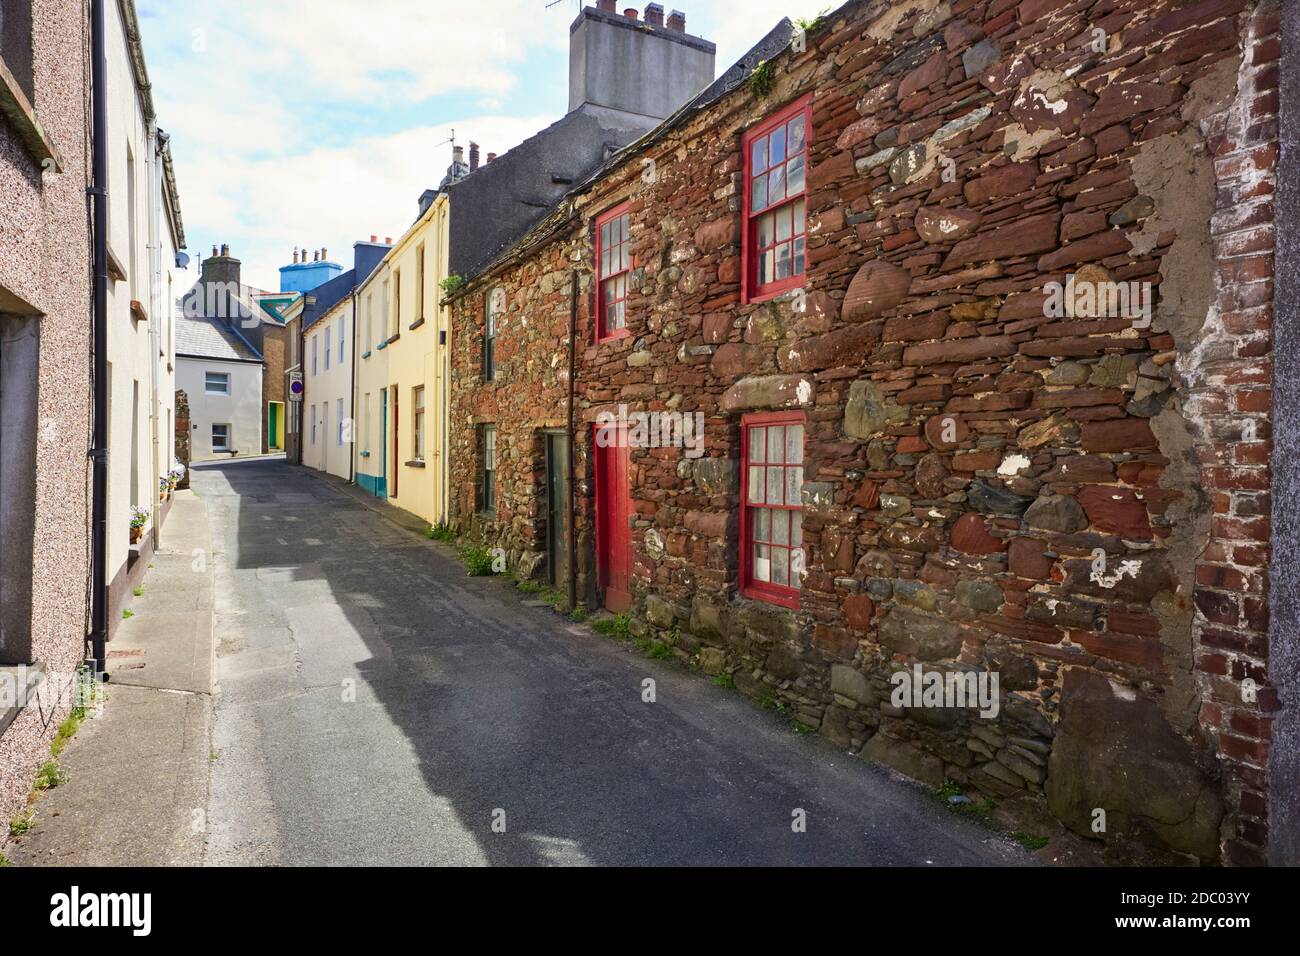 Strand Street in Peel with old cottages in red sandstone in foreground Stock Photo